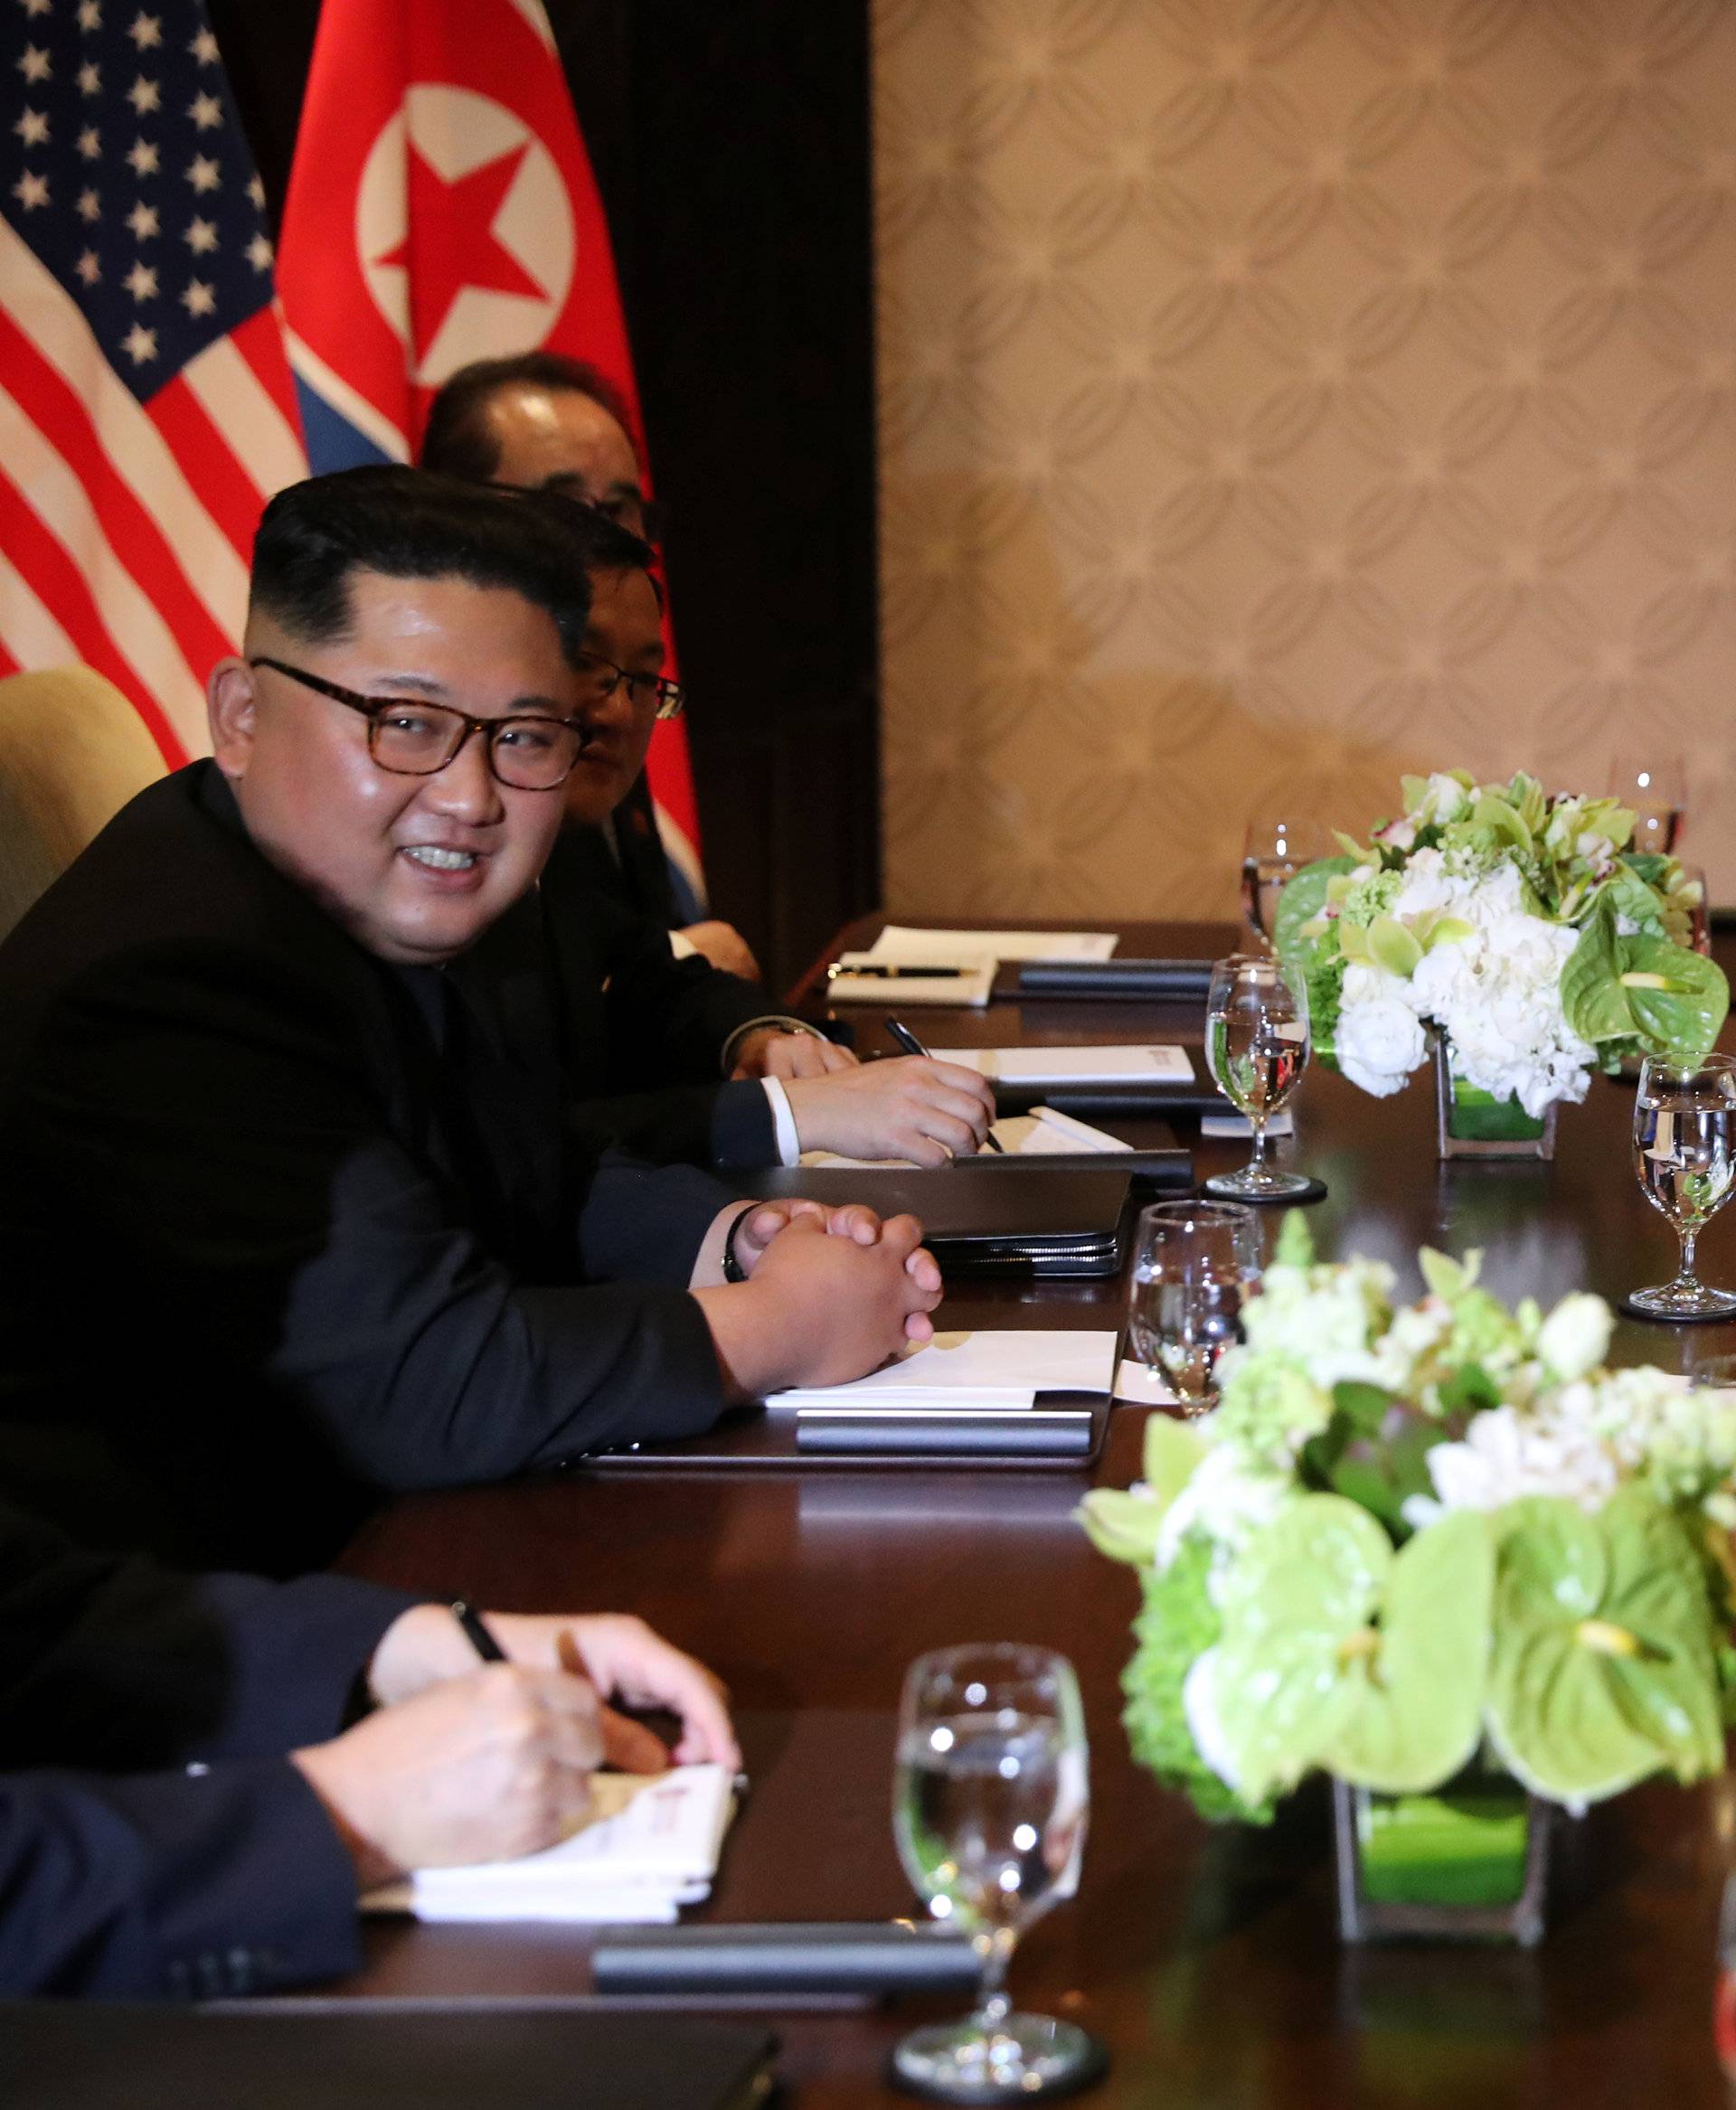 U.S. President Donald Trump is seen with North Korea's leader Kim Jong Un before their expanded bilateral meeting in Singapore